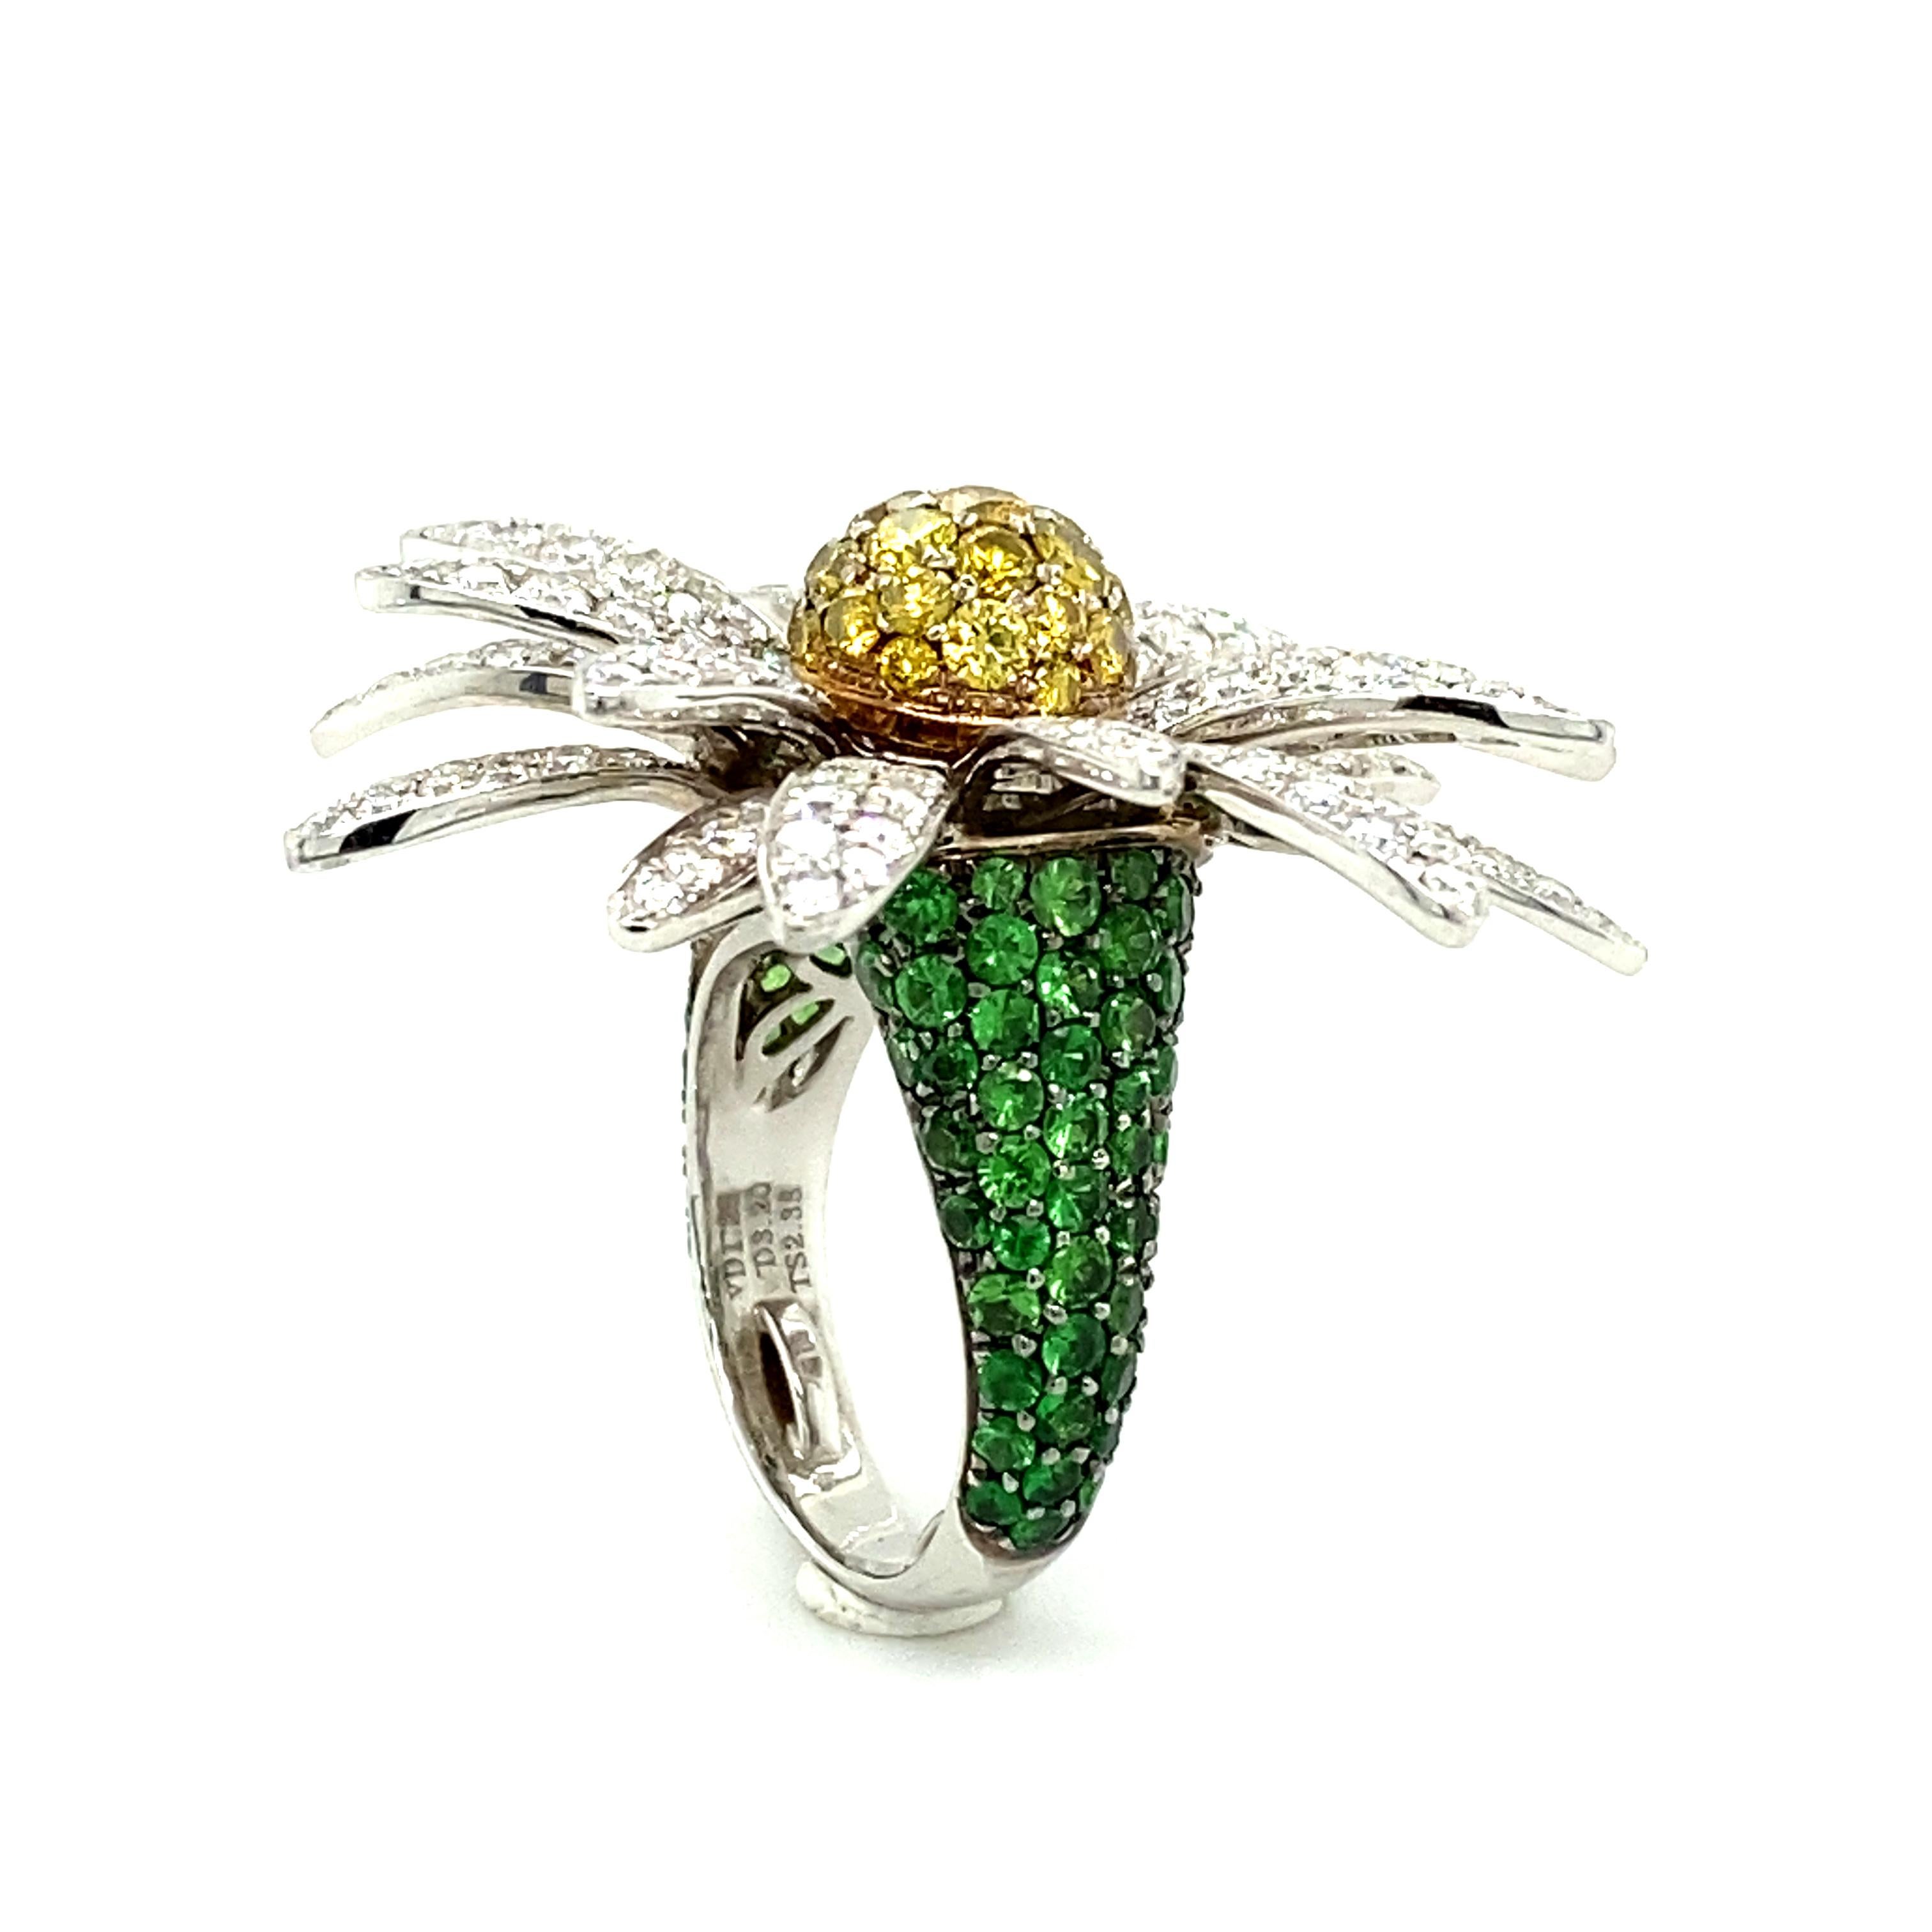 Daisy Ring with Diamonds and Tsavorites in 18 Karat White Gold by SILLAM 1835 10